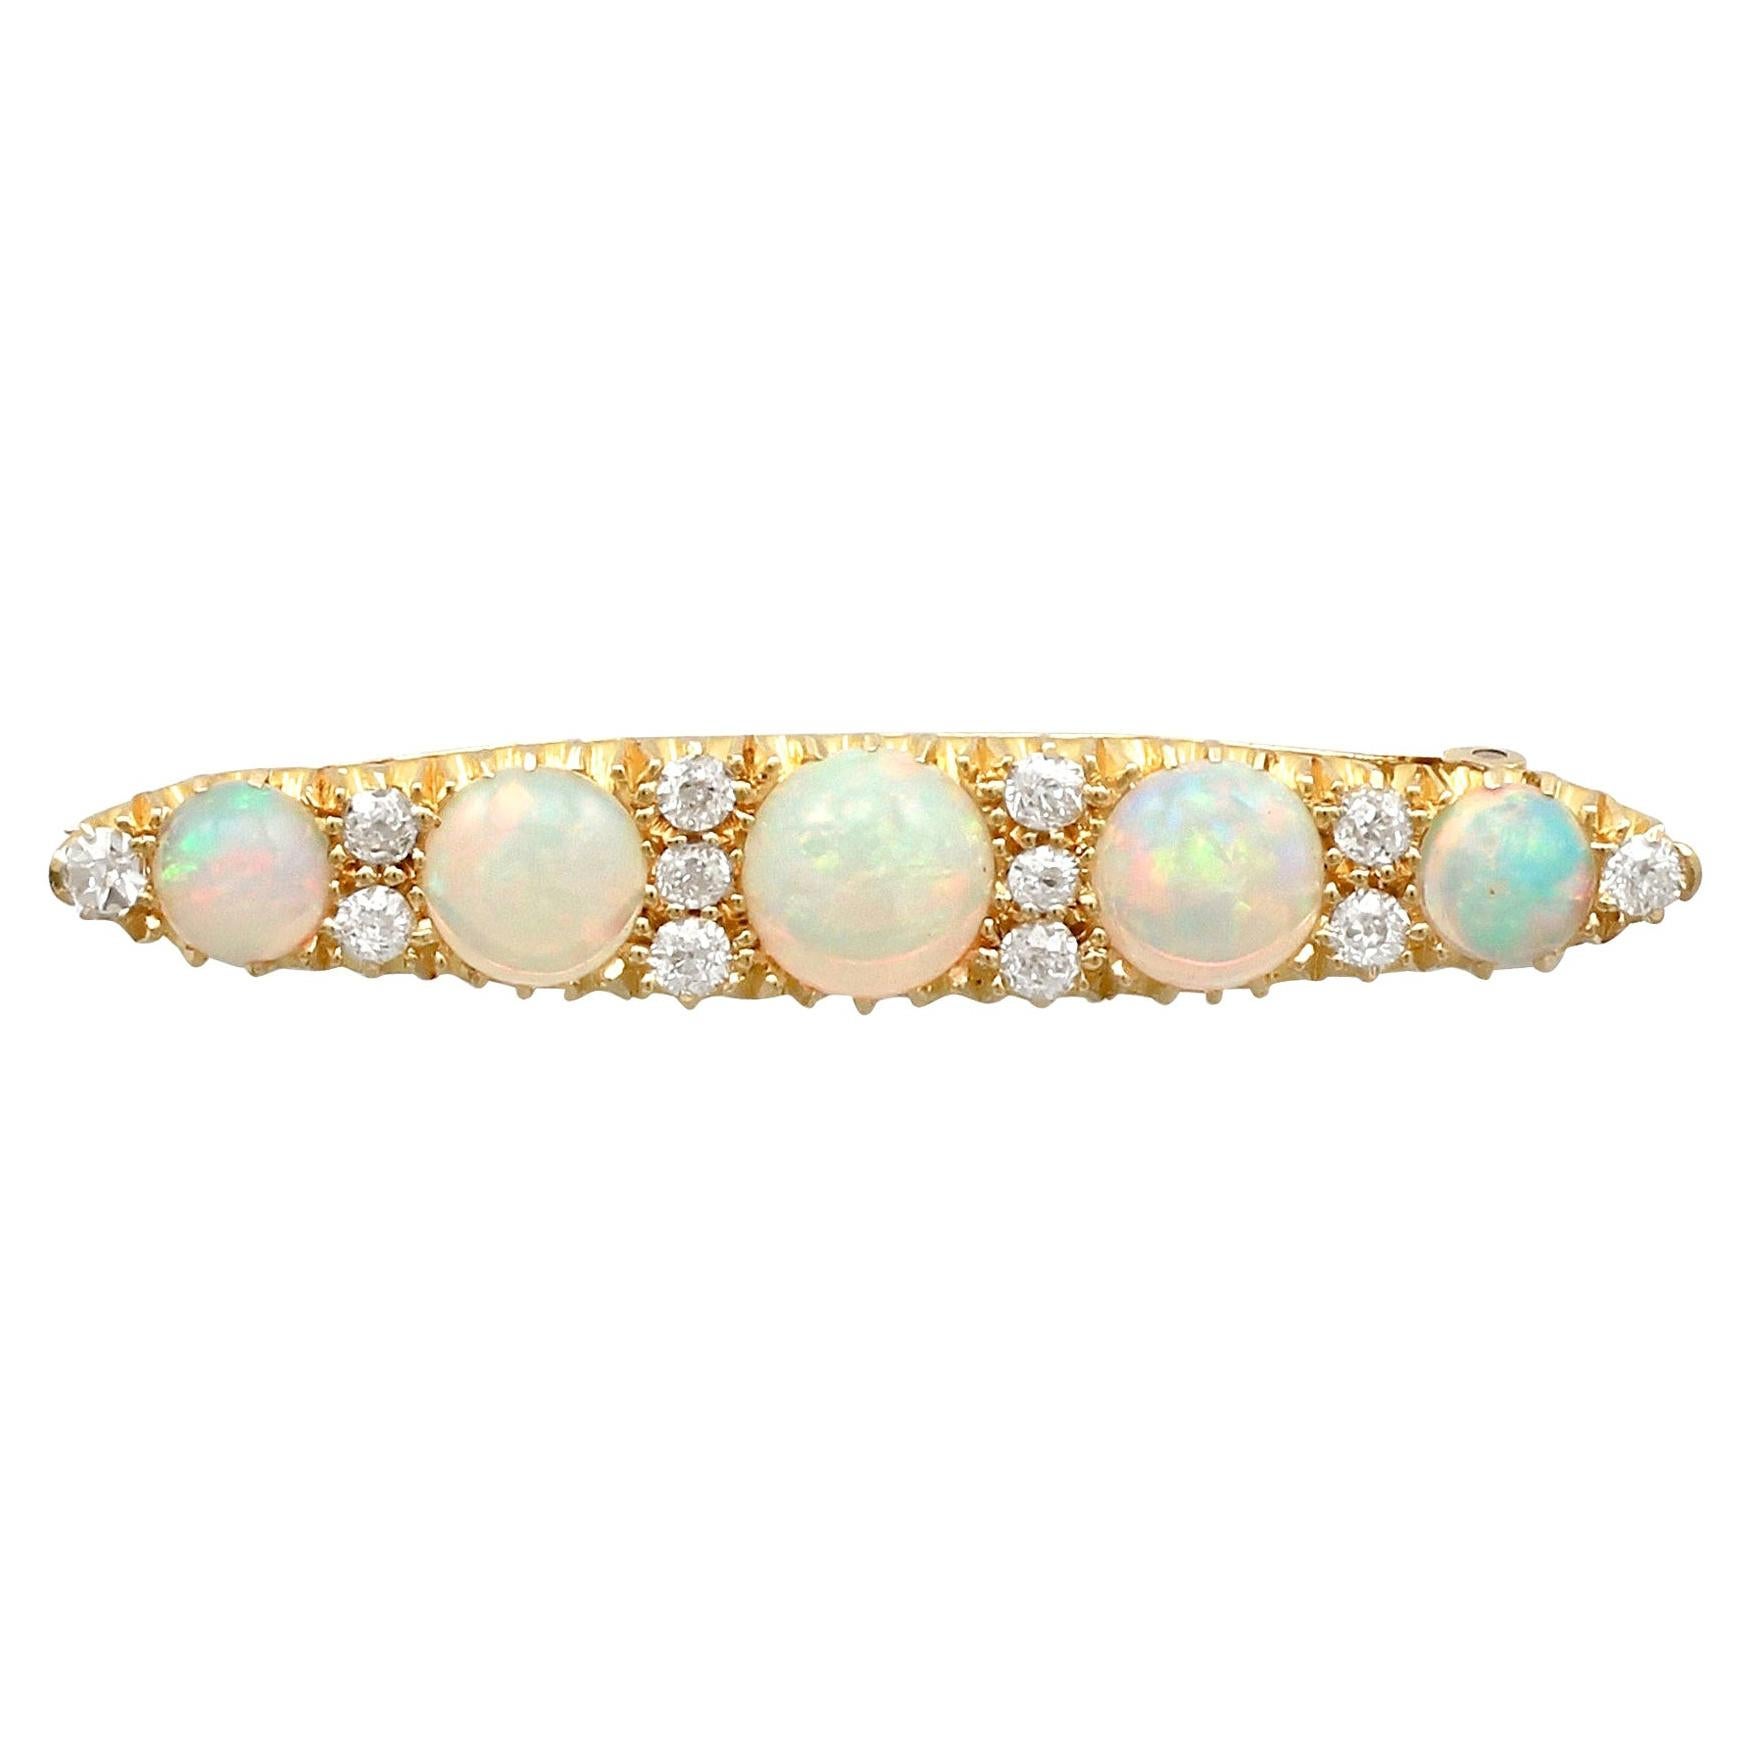 Antique Victorian 2.78Ct Cabochon Cut Opal and Diamond Yellow Gold Bar Brooch